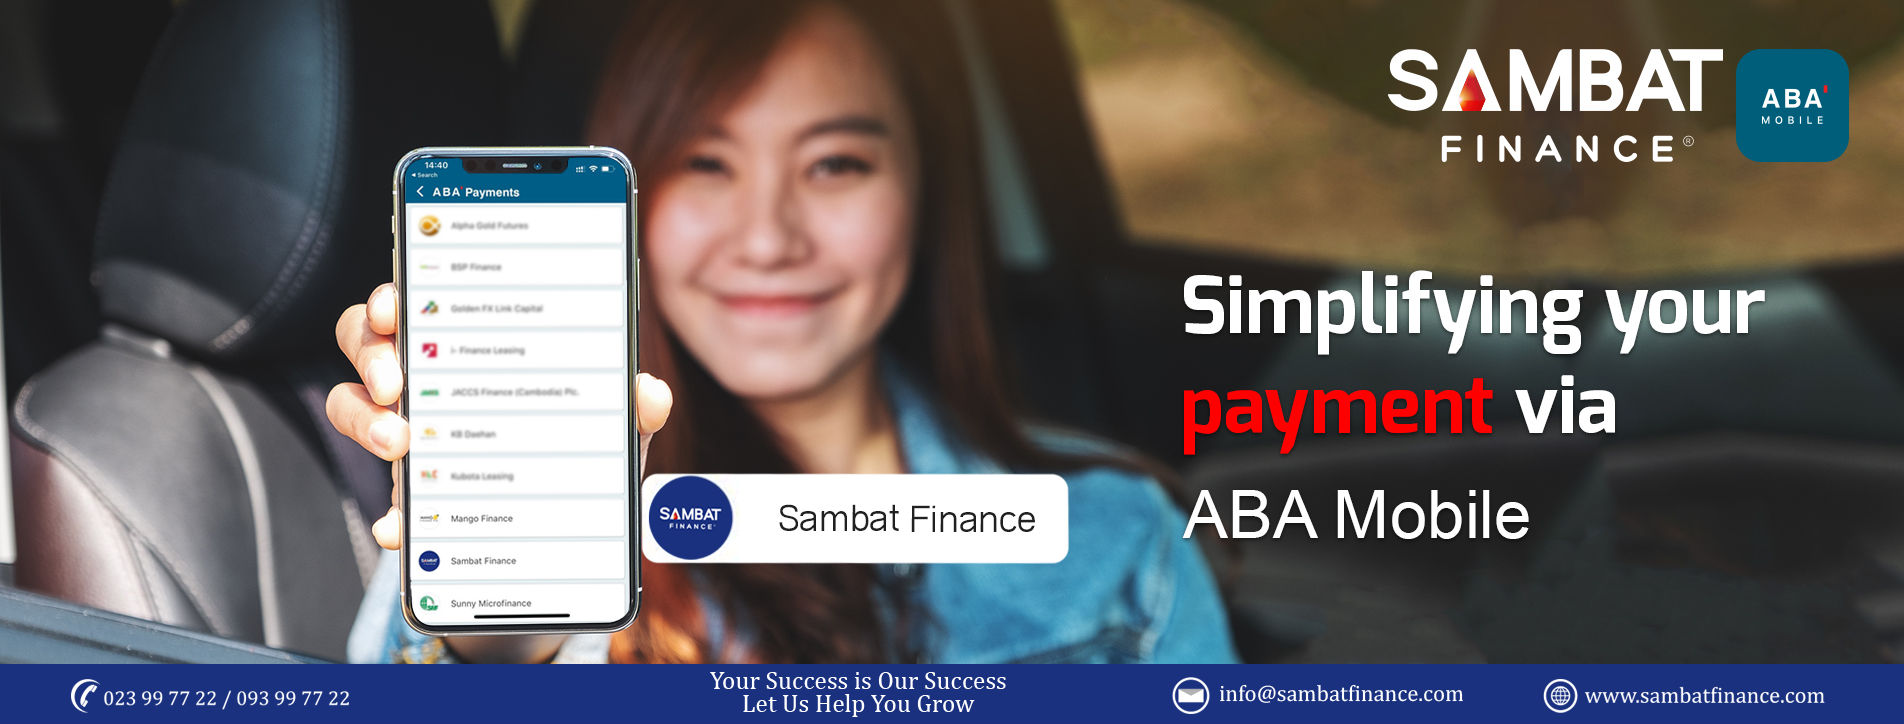 [Official Announcement] SAMBAT Finance is now connected to ABA Mobile